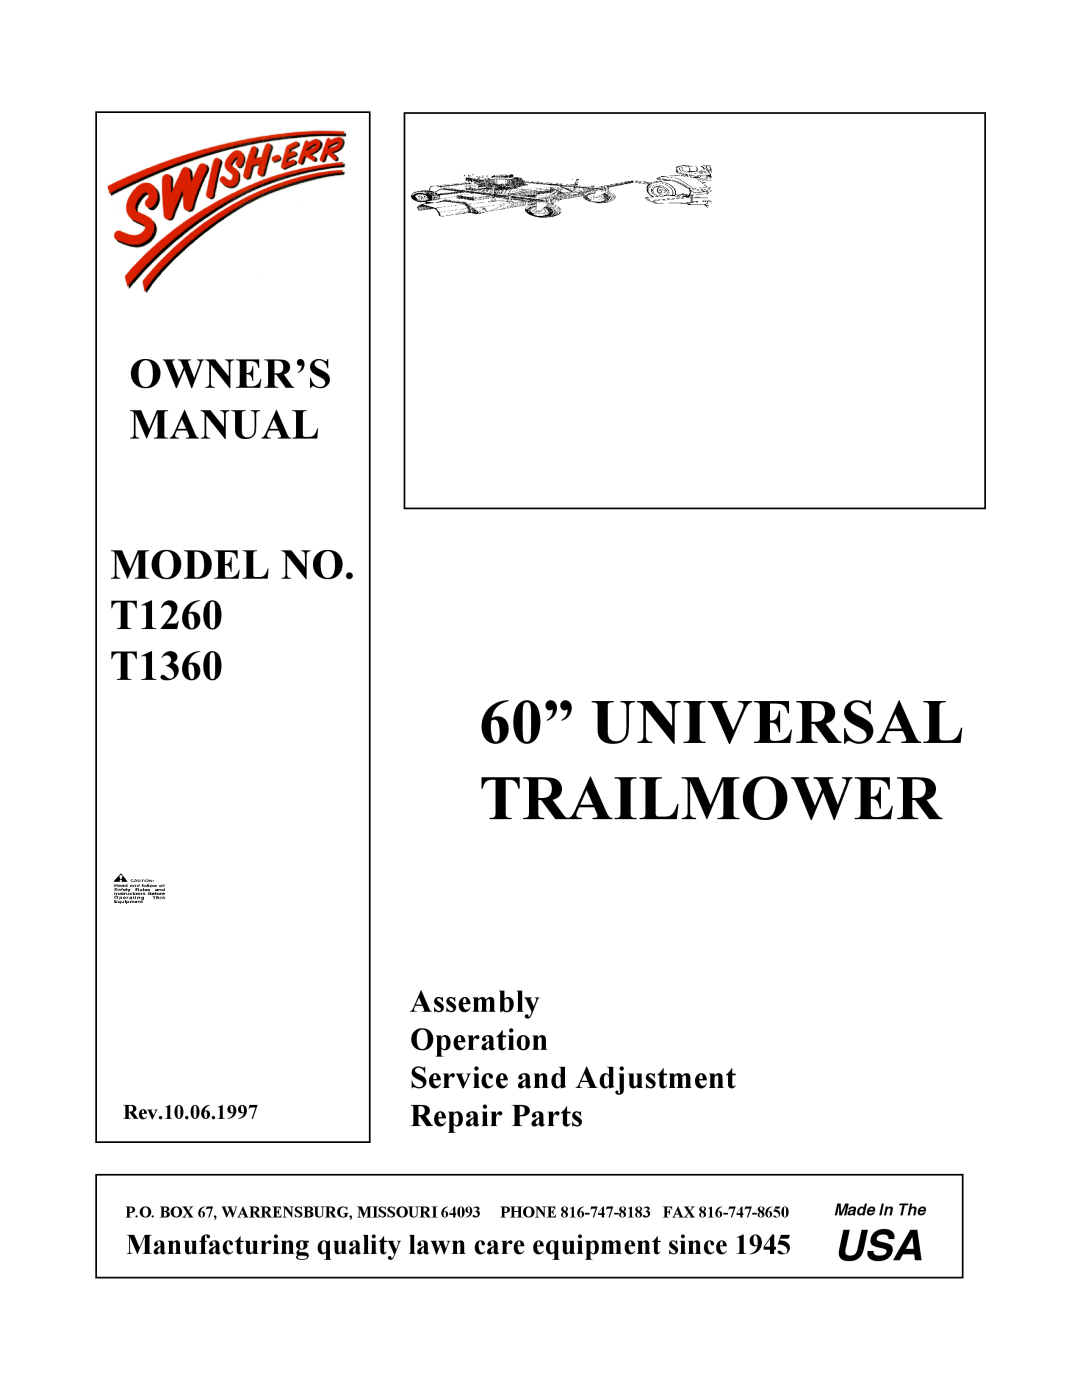 Swisher T1360 owner manual Assembly Operation Service and Adjustment, Repair Parts, 60” UNIVERSAL TRAILMOWER, Made In The 